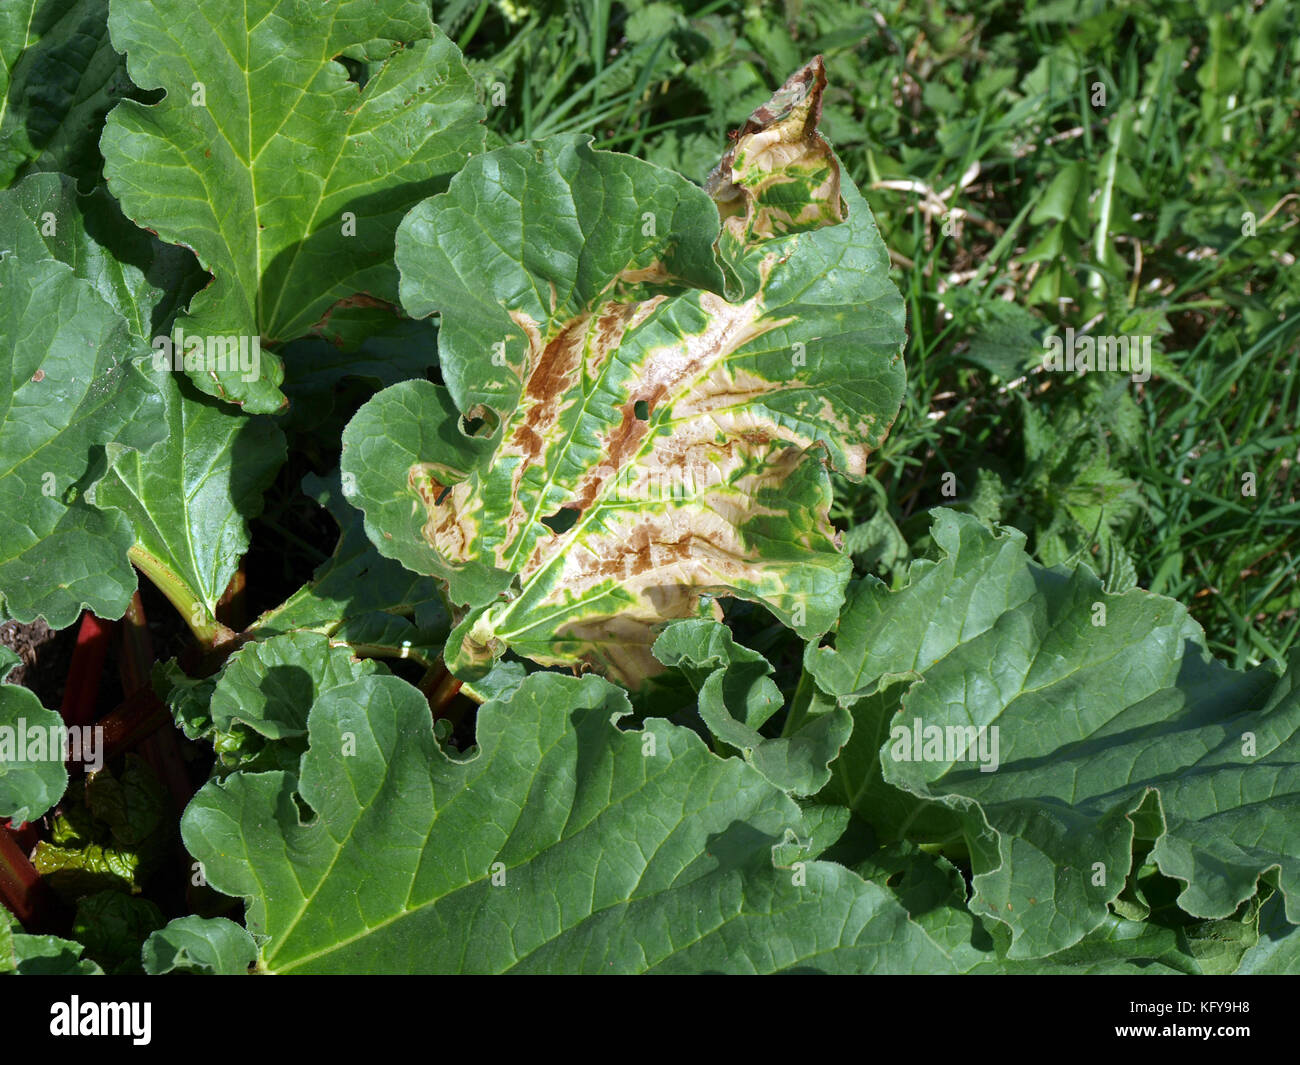 Spotted rhubarb leaves damaged with some disease Stock Photo